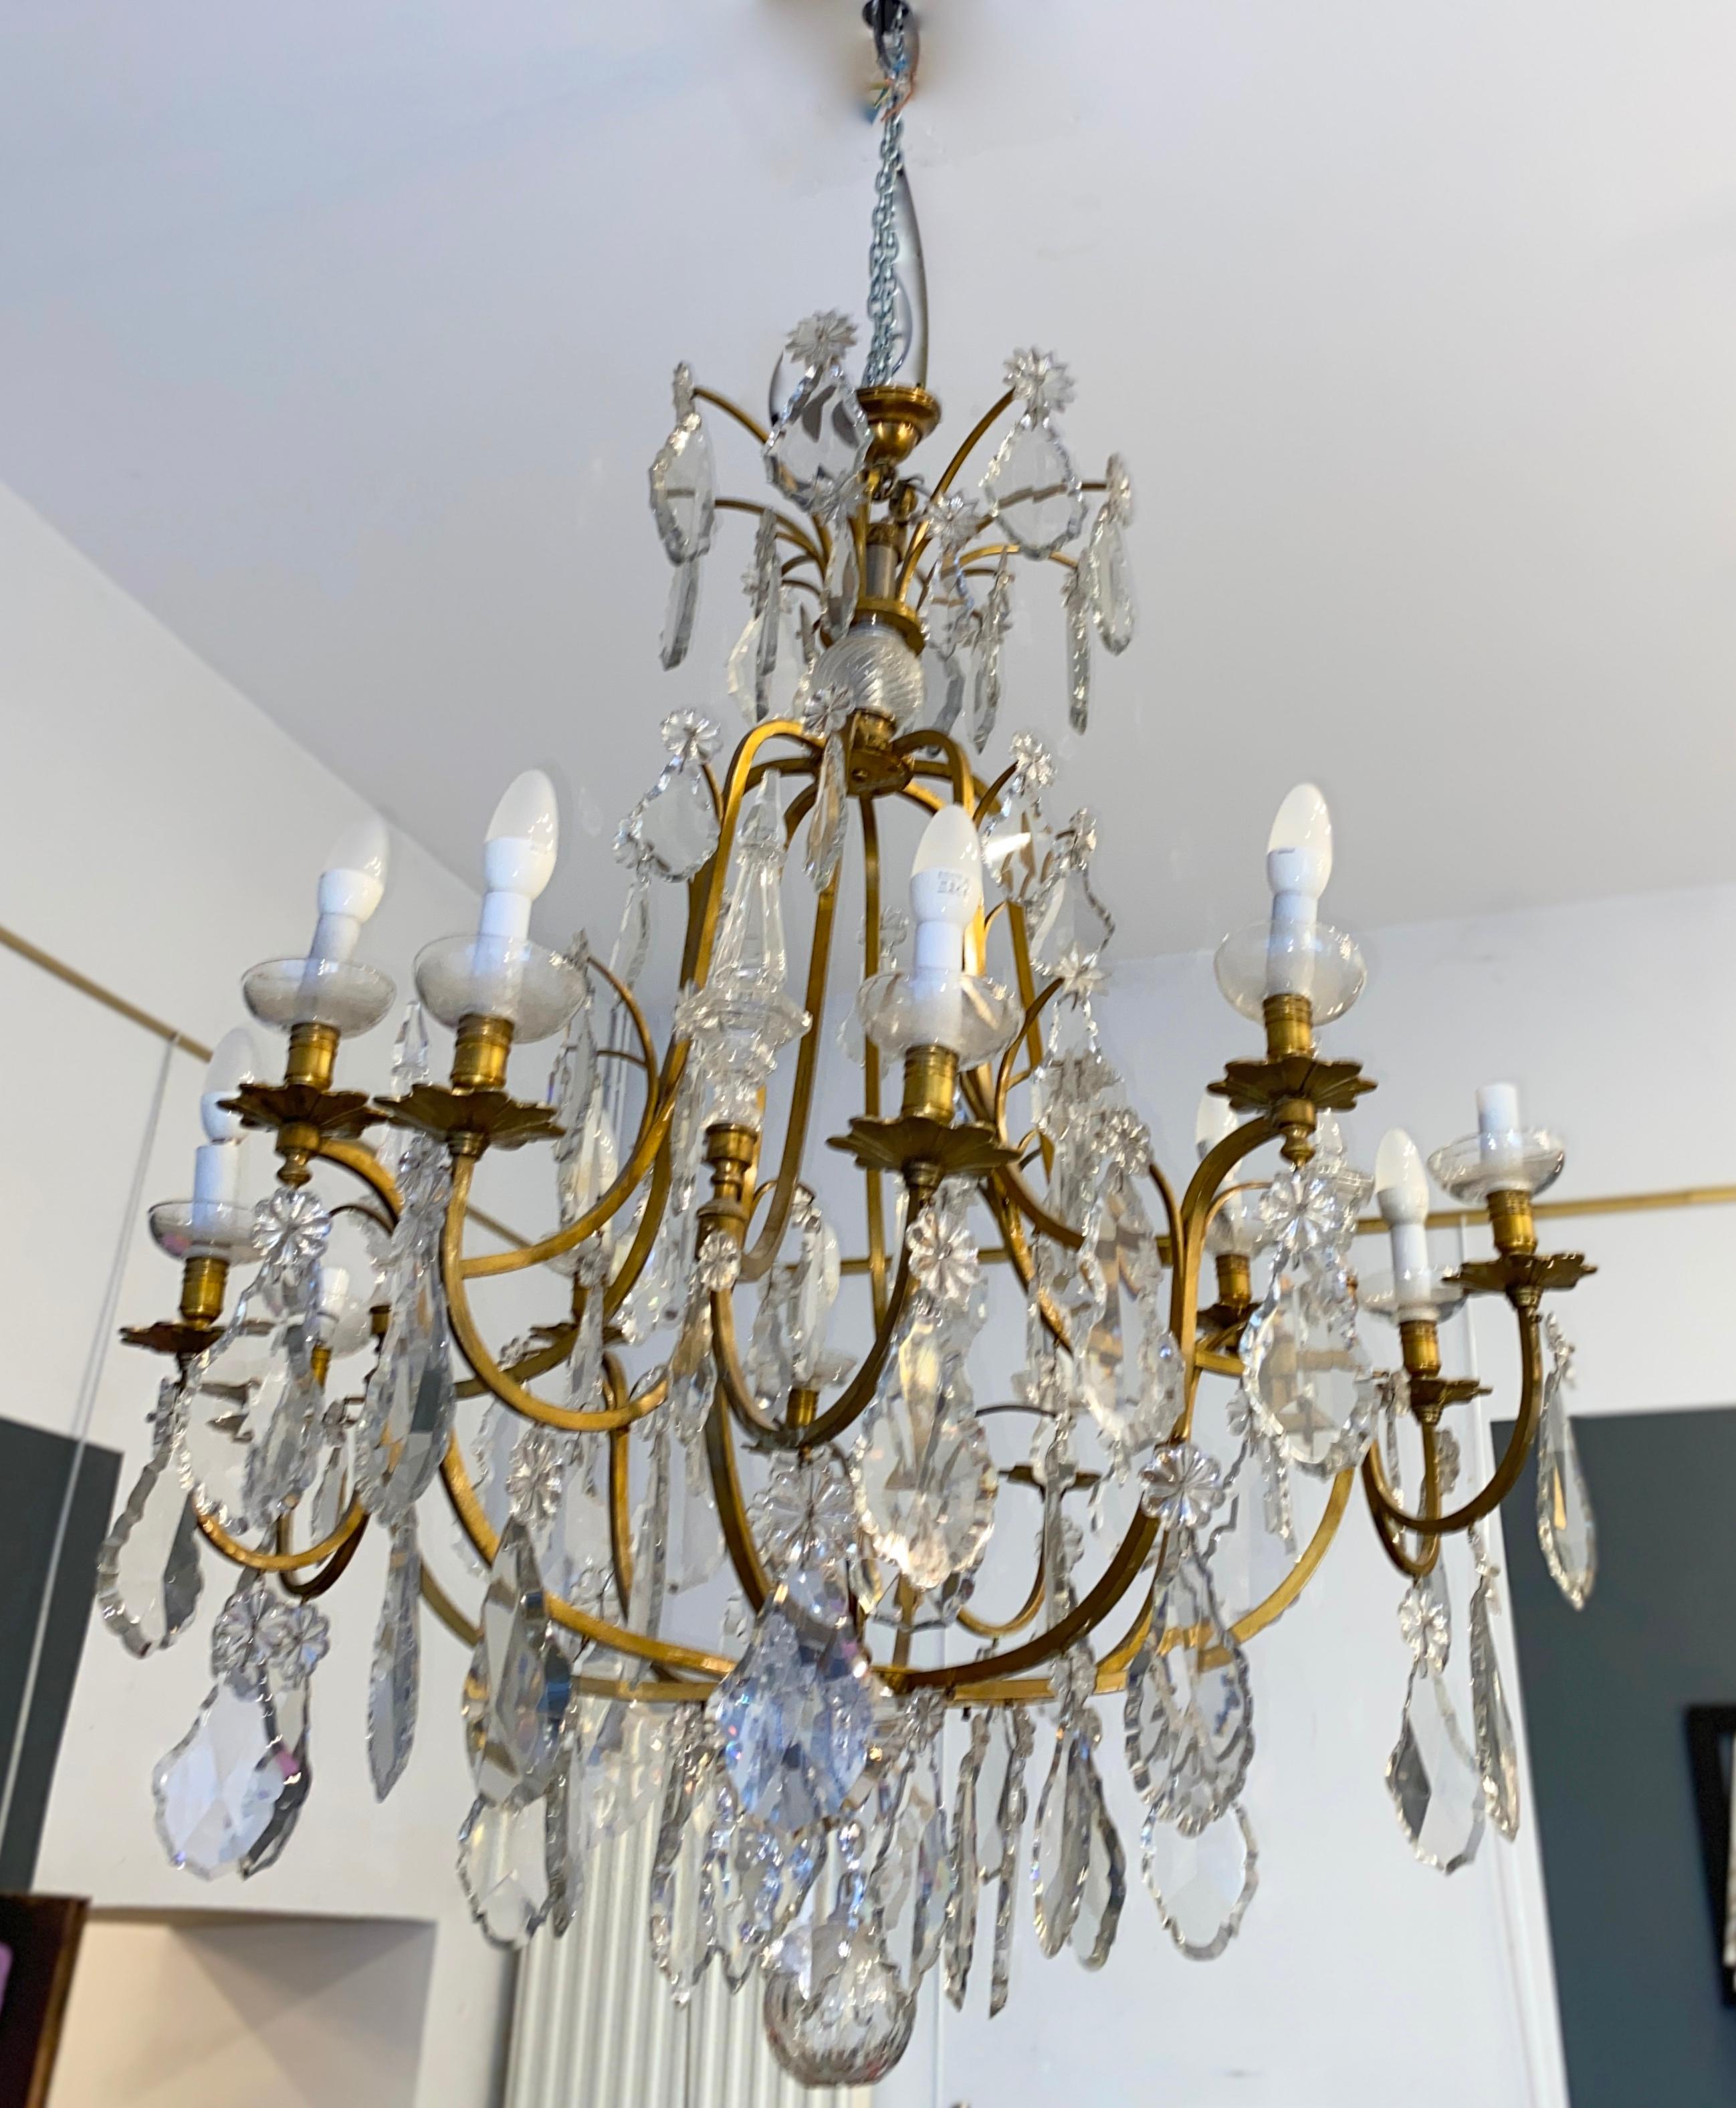 Very important bronze cage chandelier with Louis XVI style pendants
Gilt bronze and transparent glass chandelier
12 electrified arms dating from the late 19th century.
 